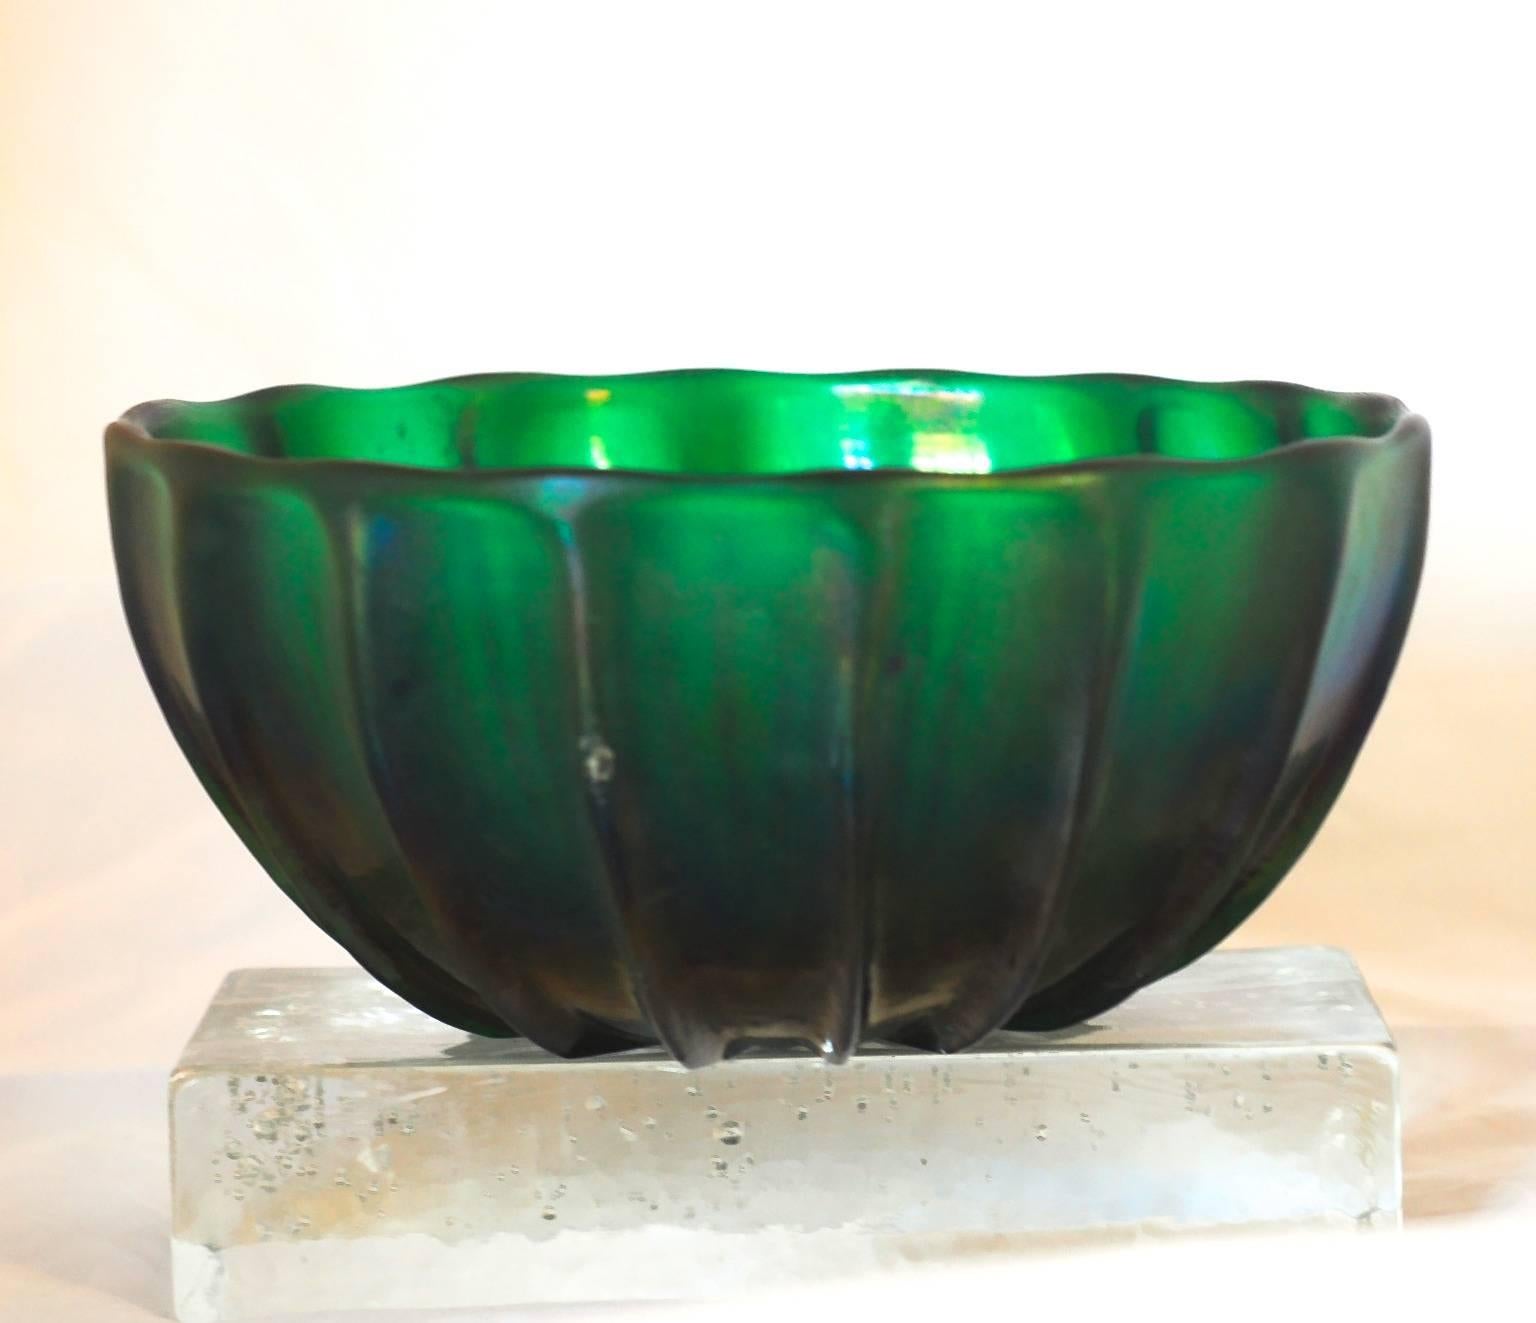 Massif rigadin technique, green with deep iridescence. Hand opened. Typical Archimede Seguso Serenella 18 green. Hard to find, part of a beautiful collection listed in his quaderni.
Beautiful heavy green bowl made by Archimede Seguso. Signed and